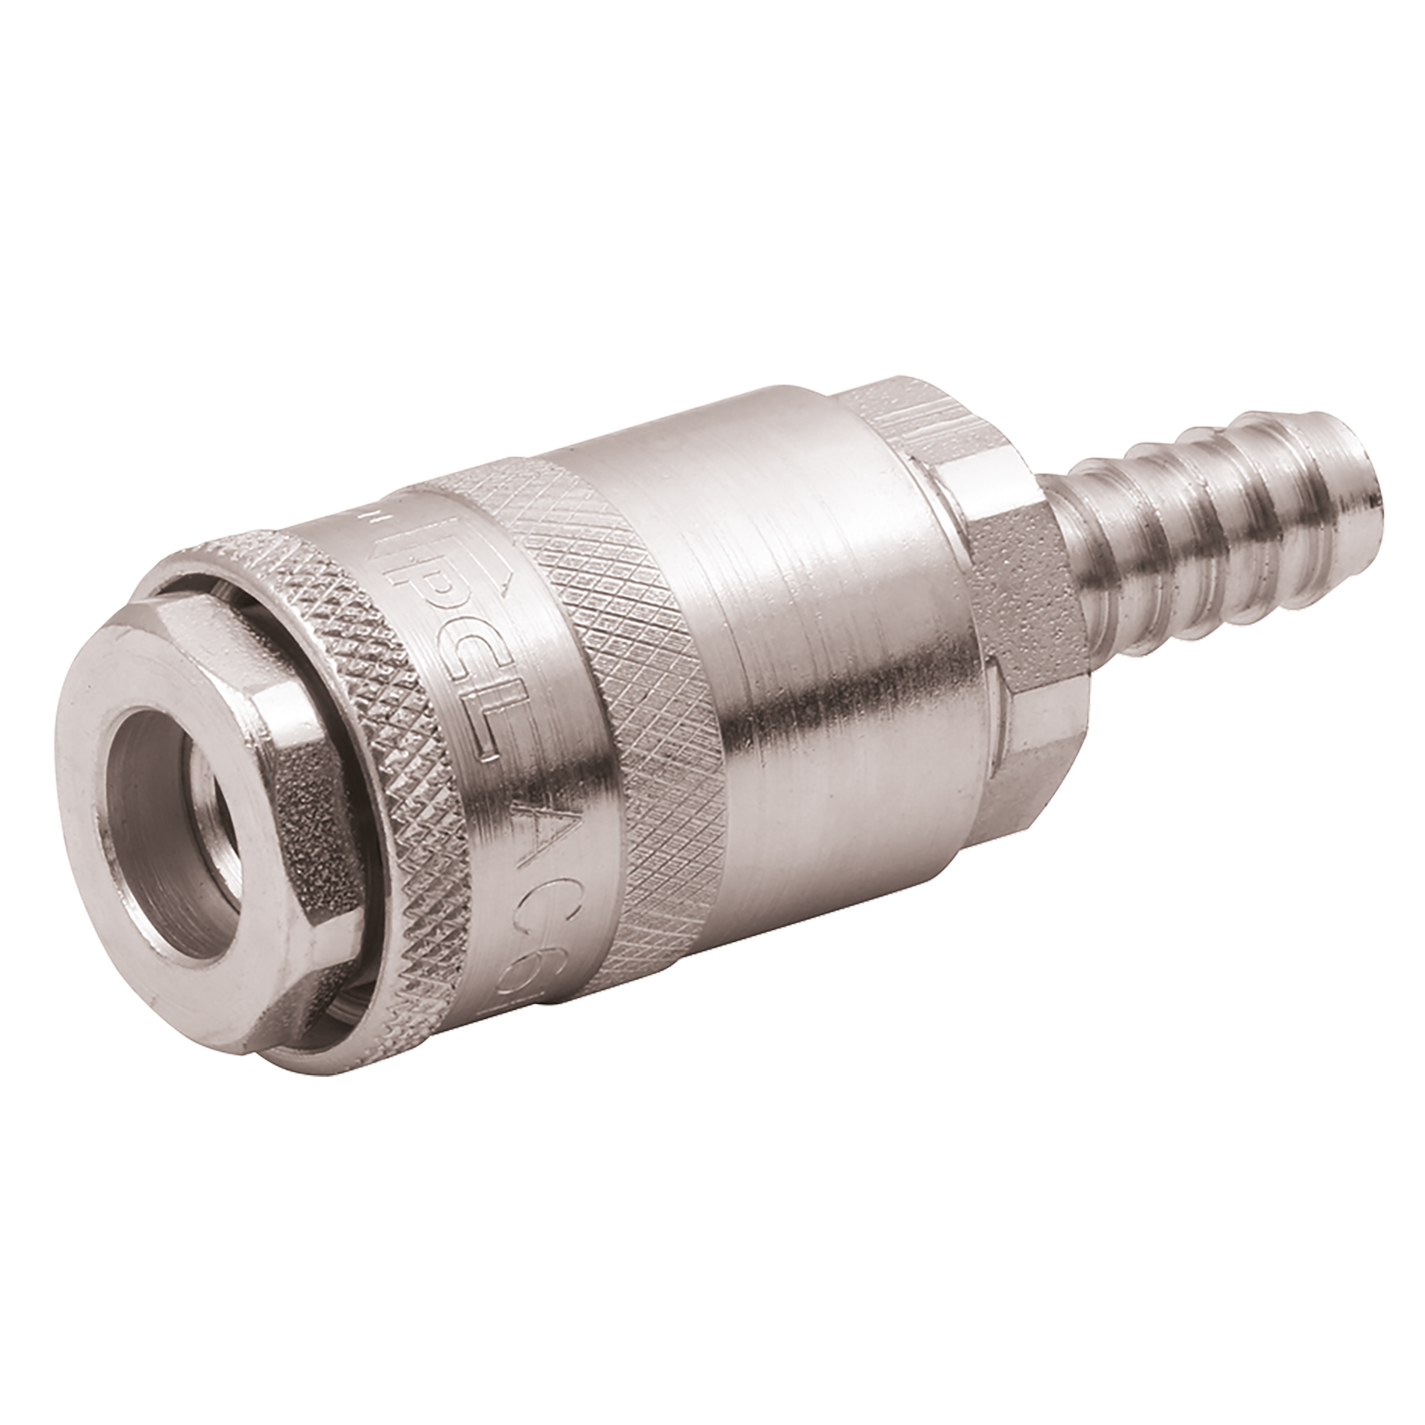 6MM H.TAIL PCL EURO COUPLING